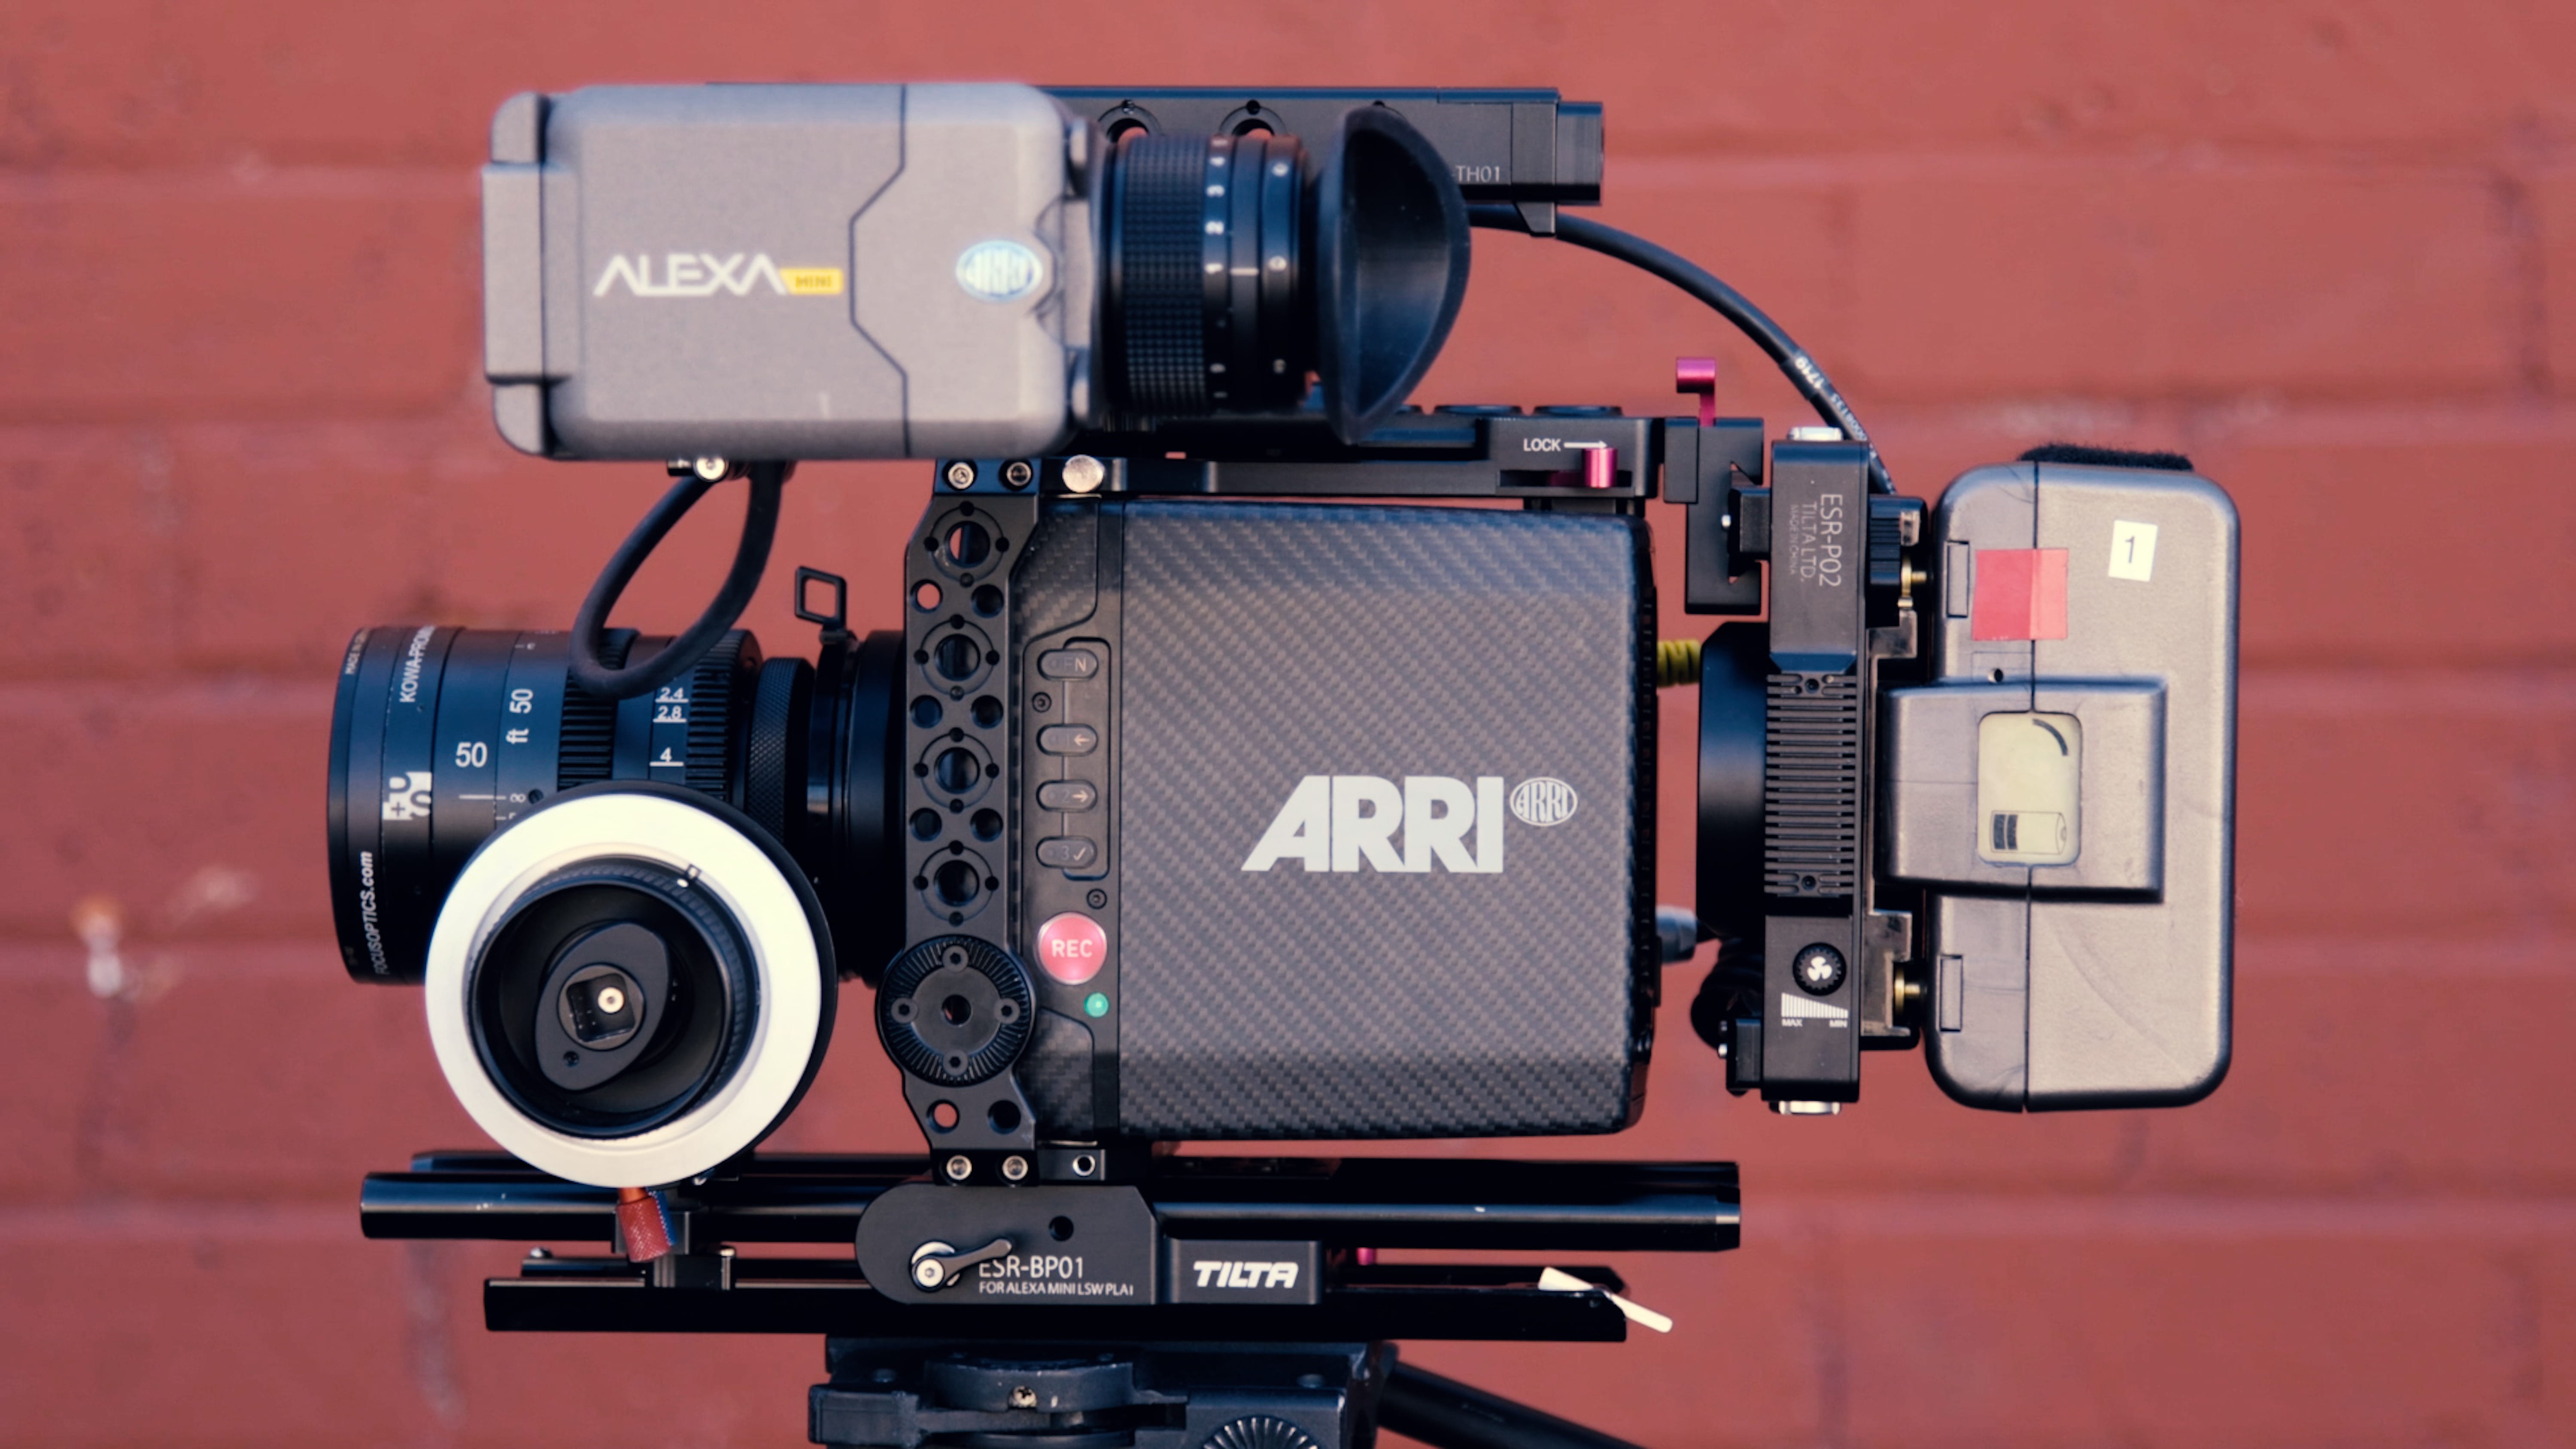 black and gray Arri video camera, shallow focus photography of camera